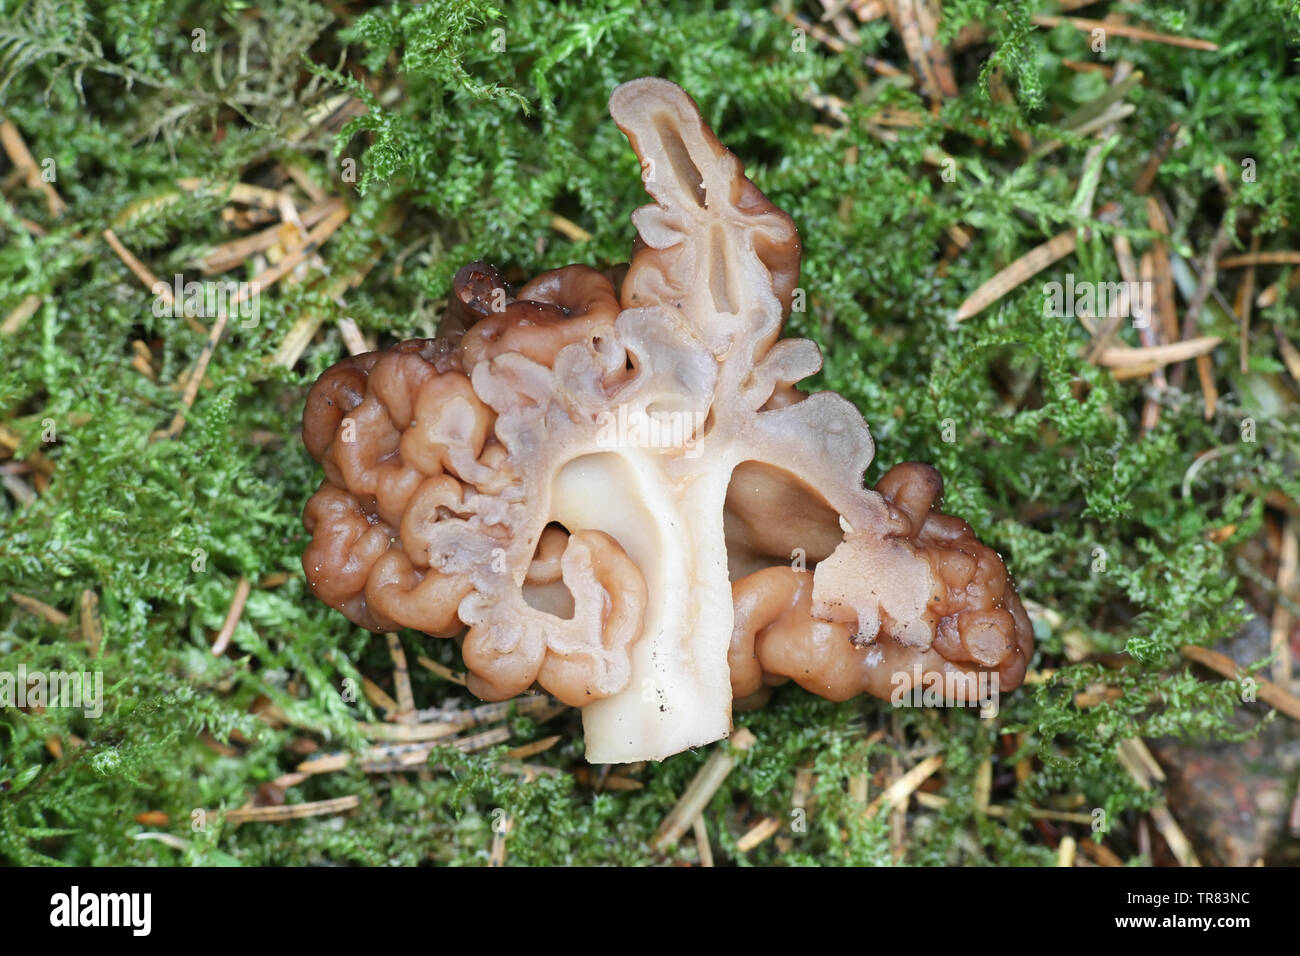 Gyromitra esculenta, known as the False Morel, a wild mushroom from Finland Stock Photo